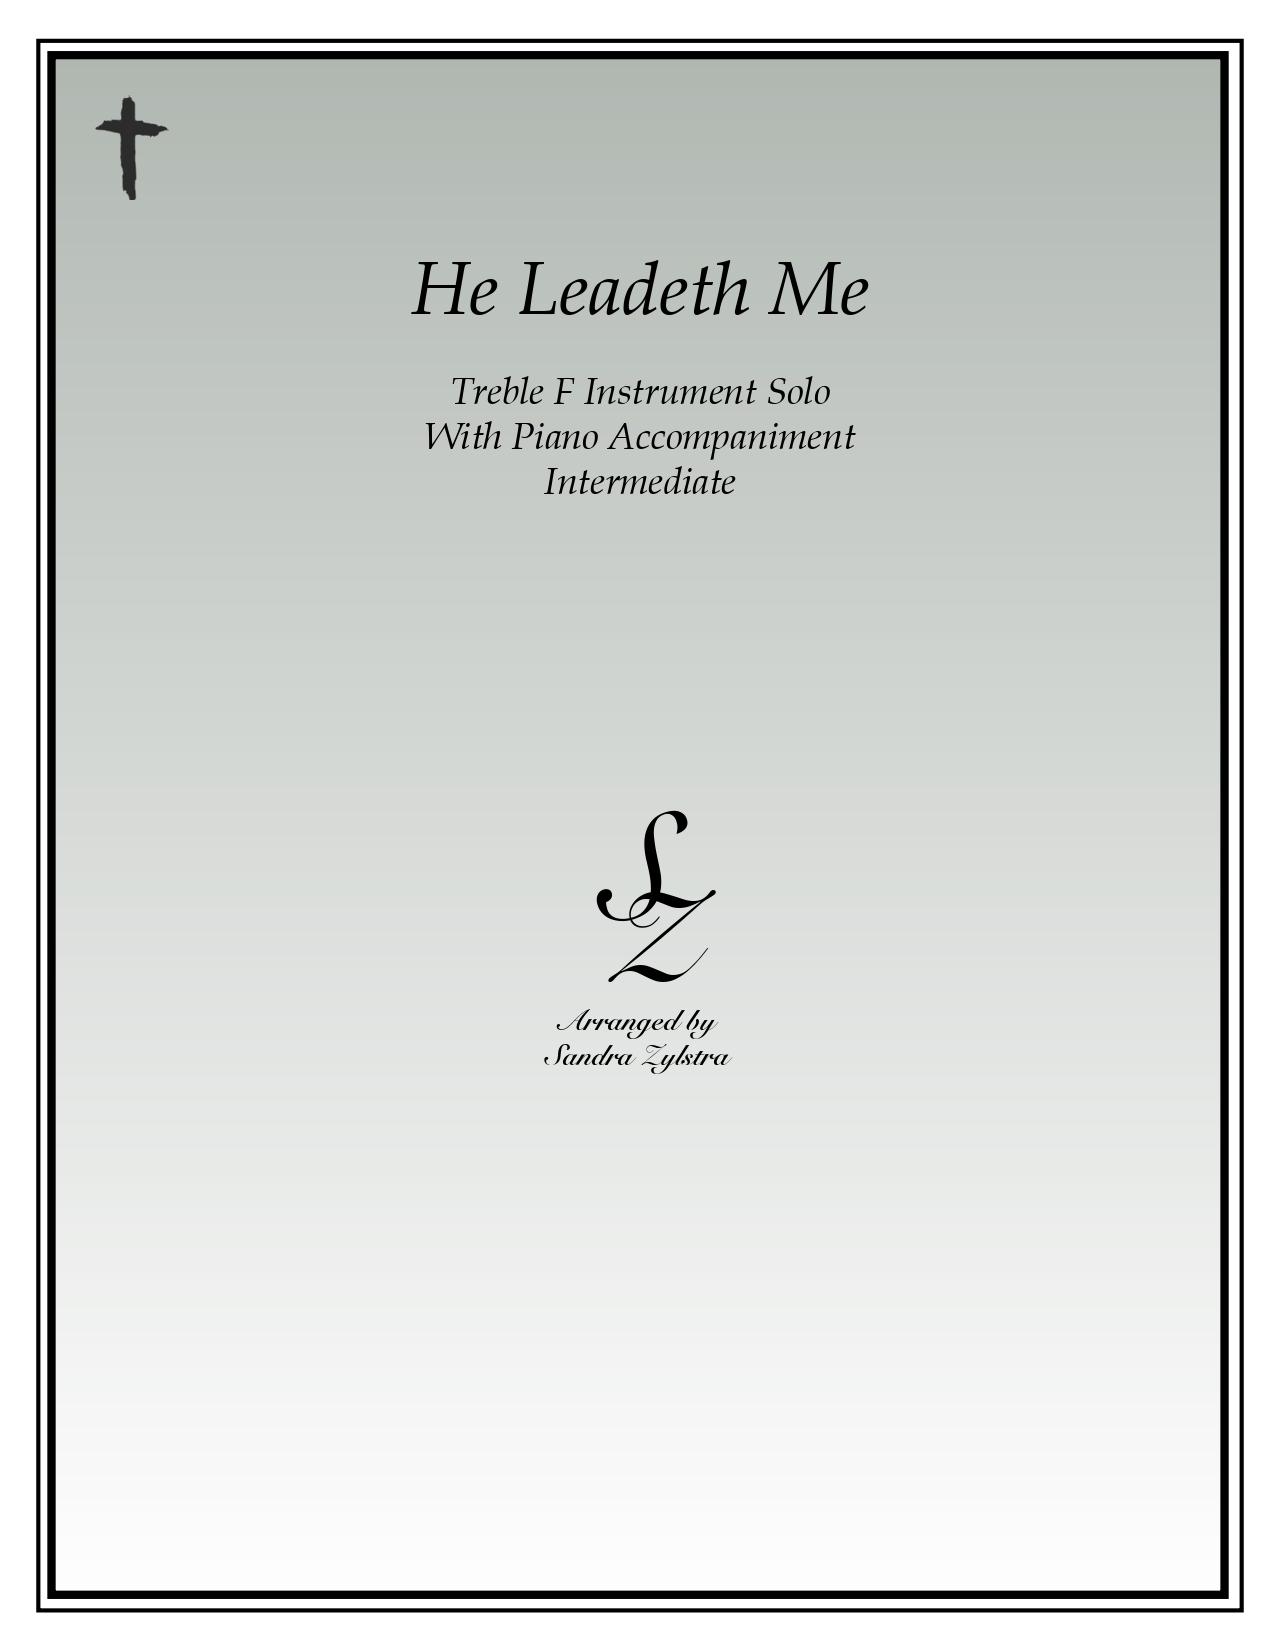 He Leadeth Me F instrument solo part cover page 00011